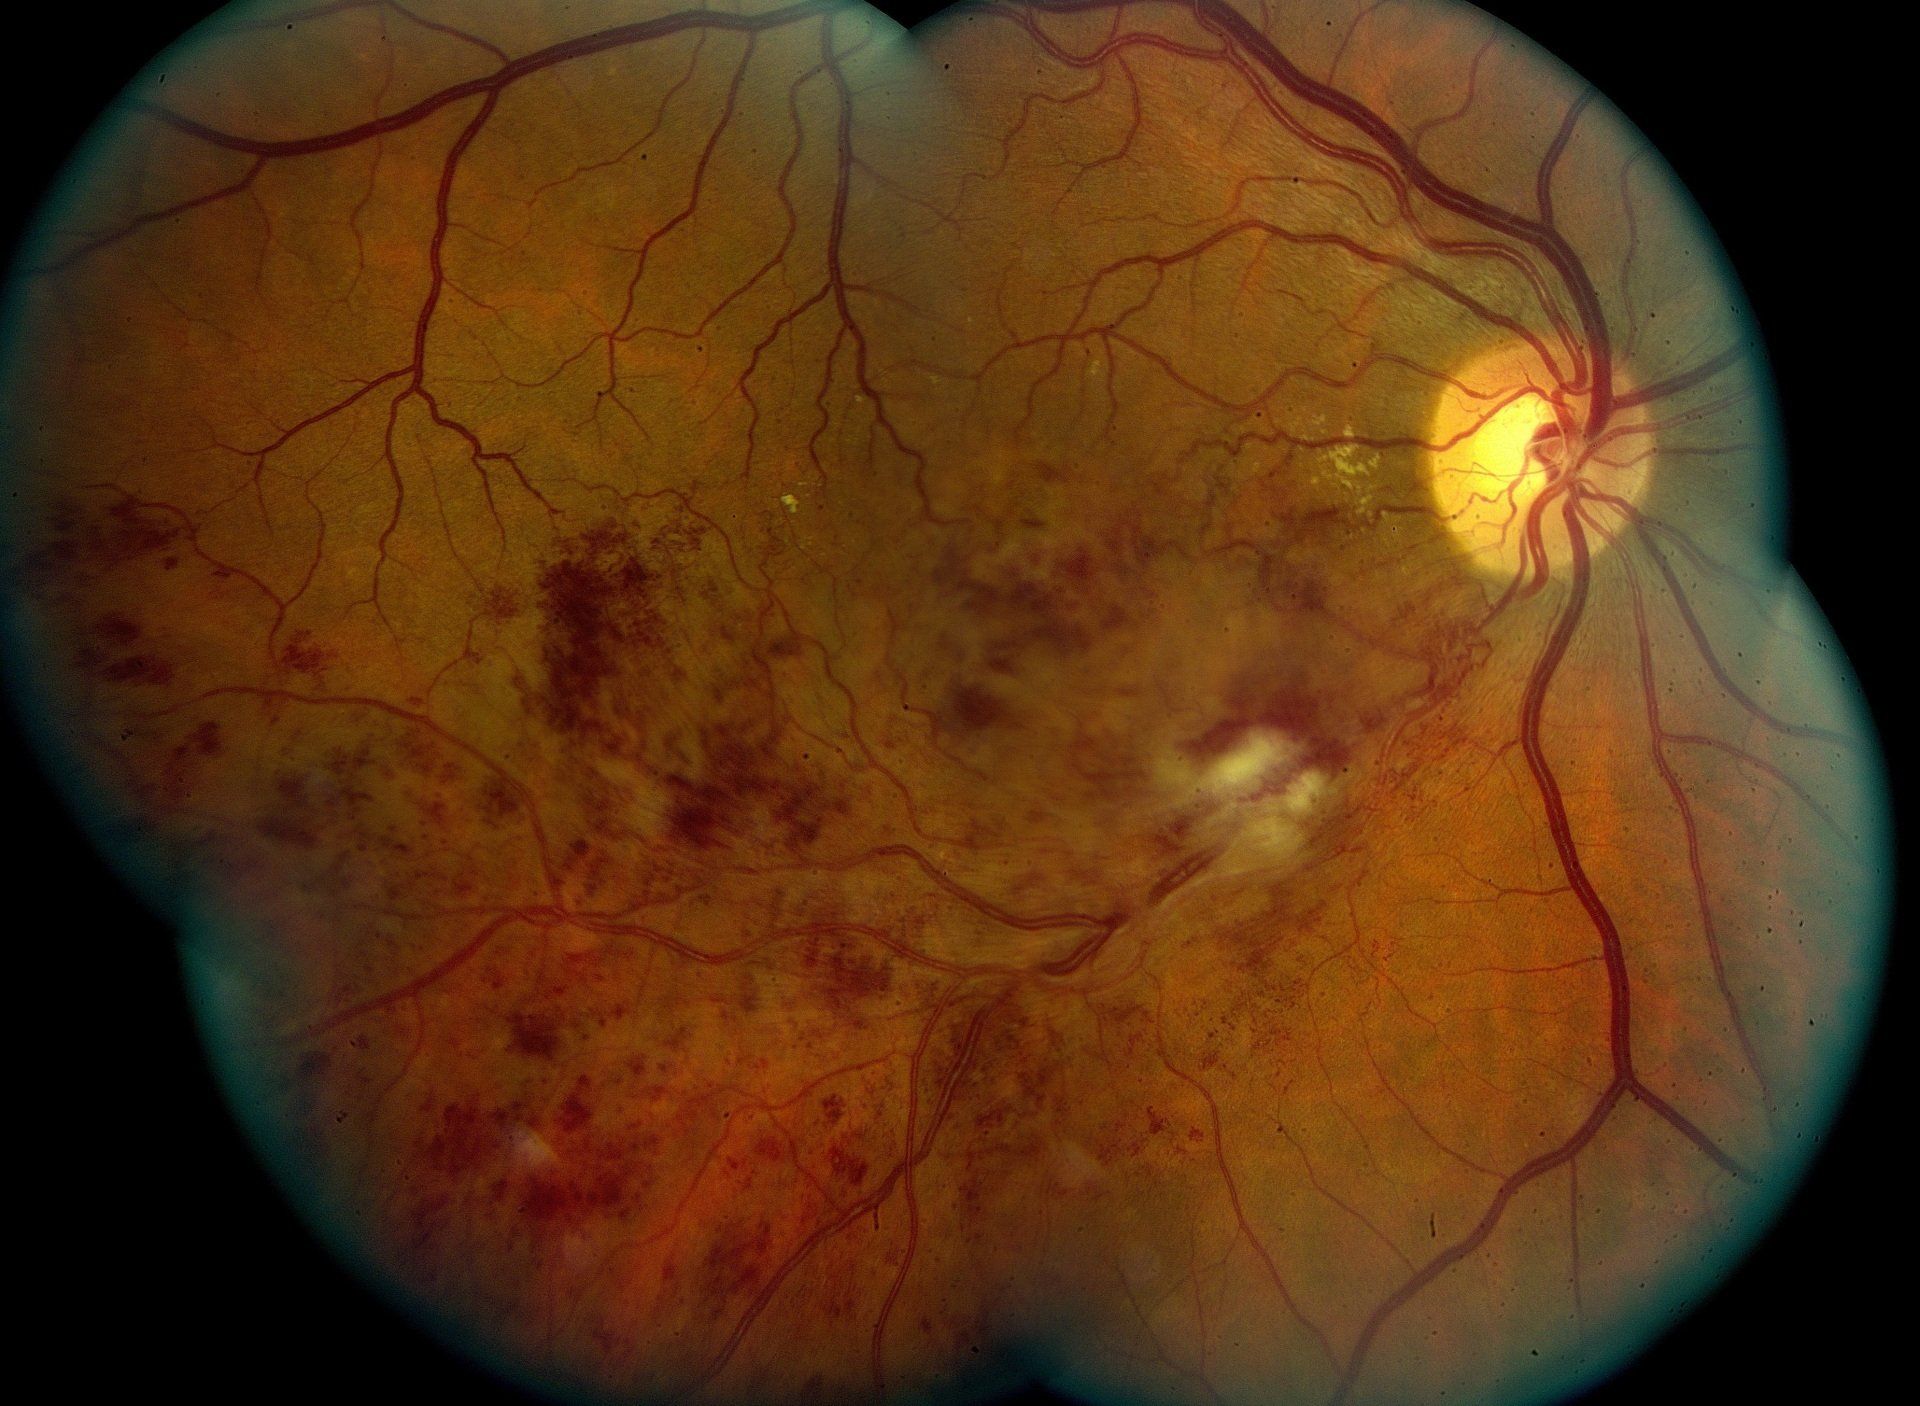 Retinal vein occlusion of the right eye